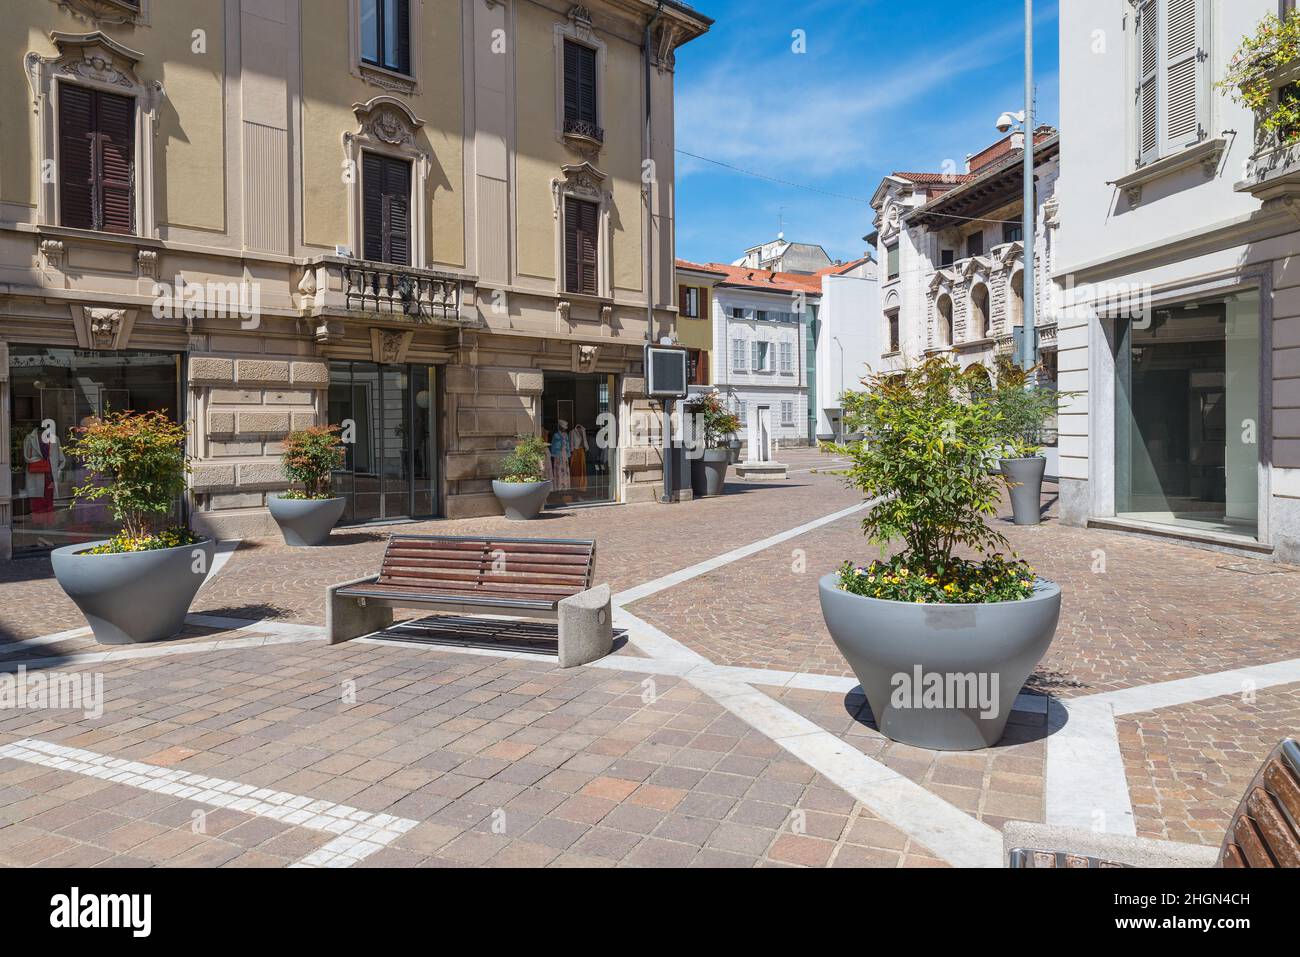 Historic center of an Italian city with street furniture, benches and planters. Gallarate town, street Teatro, northern Italy Stock Photo